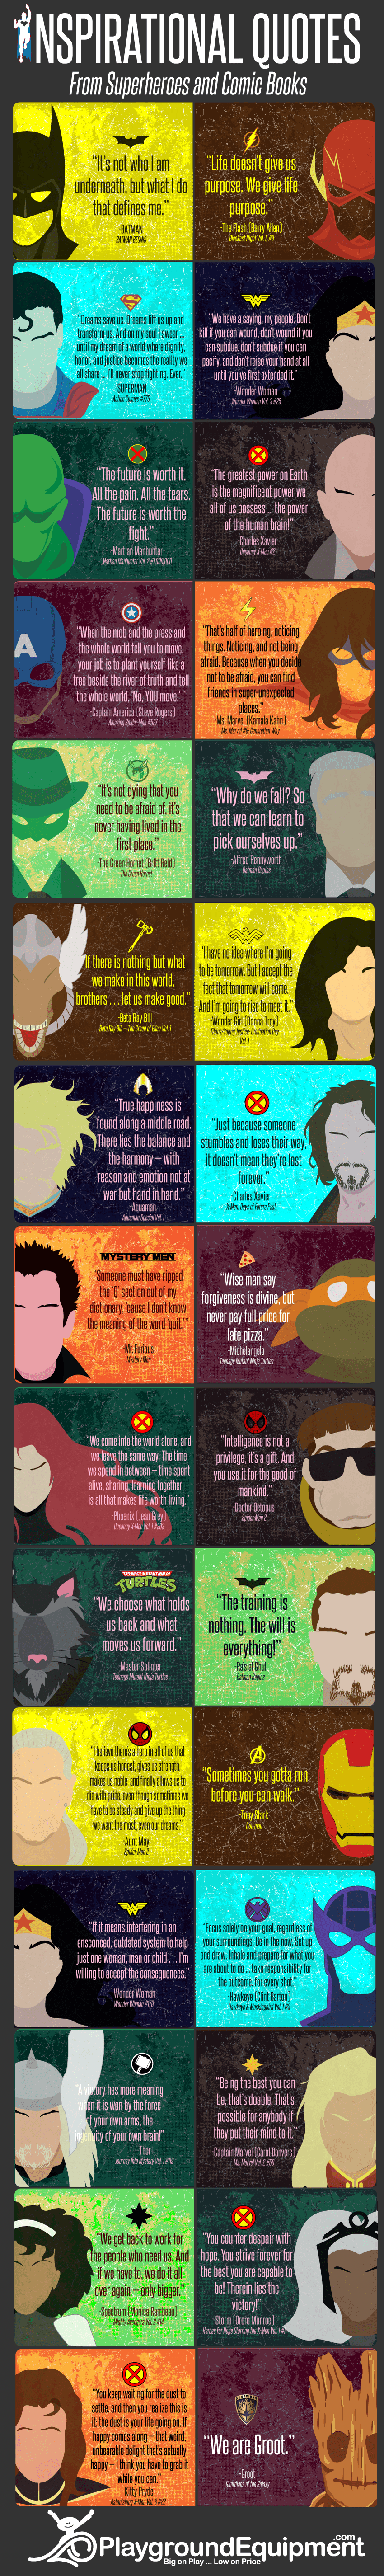 Inspirational Quotes from Superheroes and Comic Books Infographic